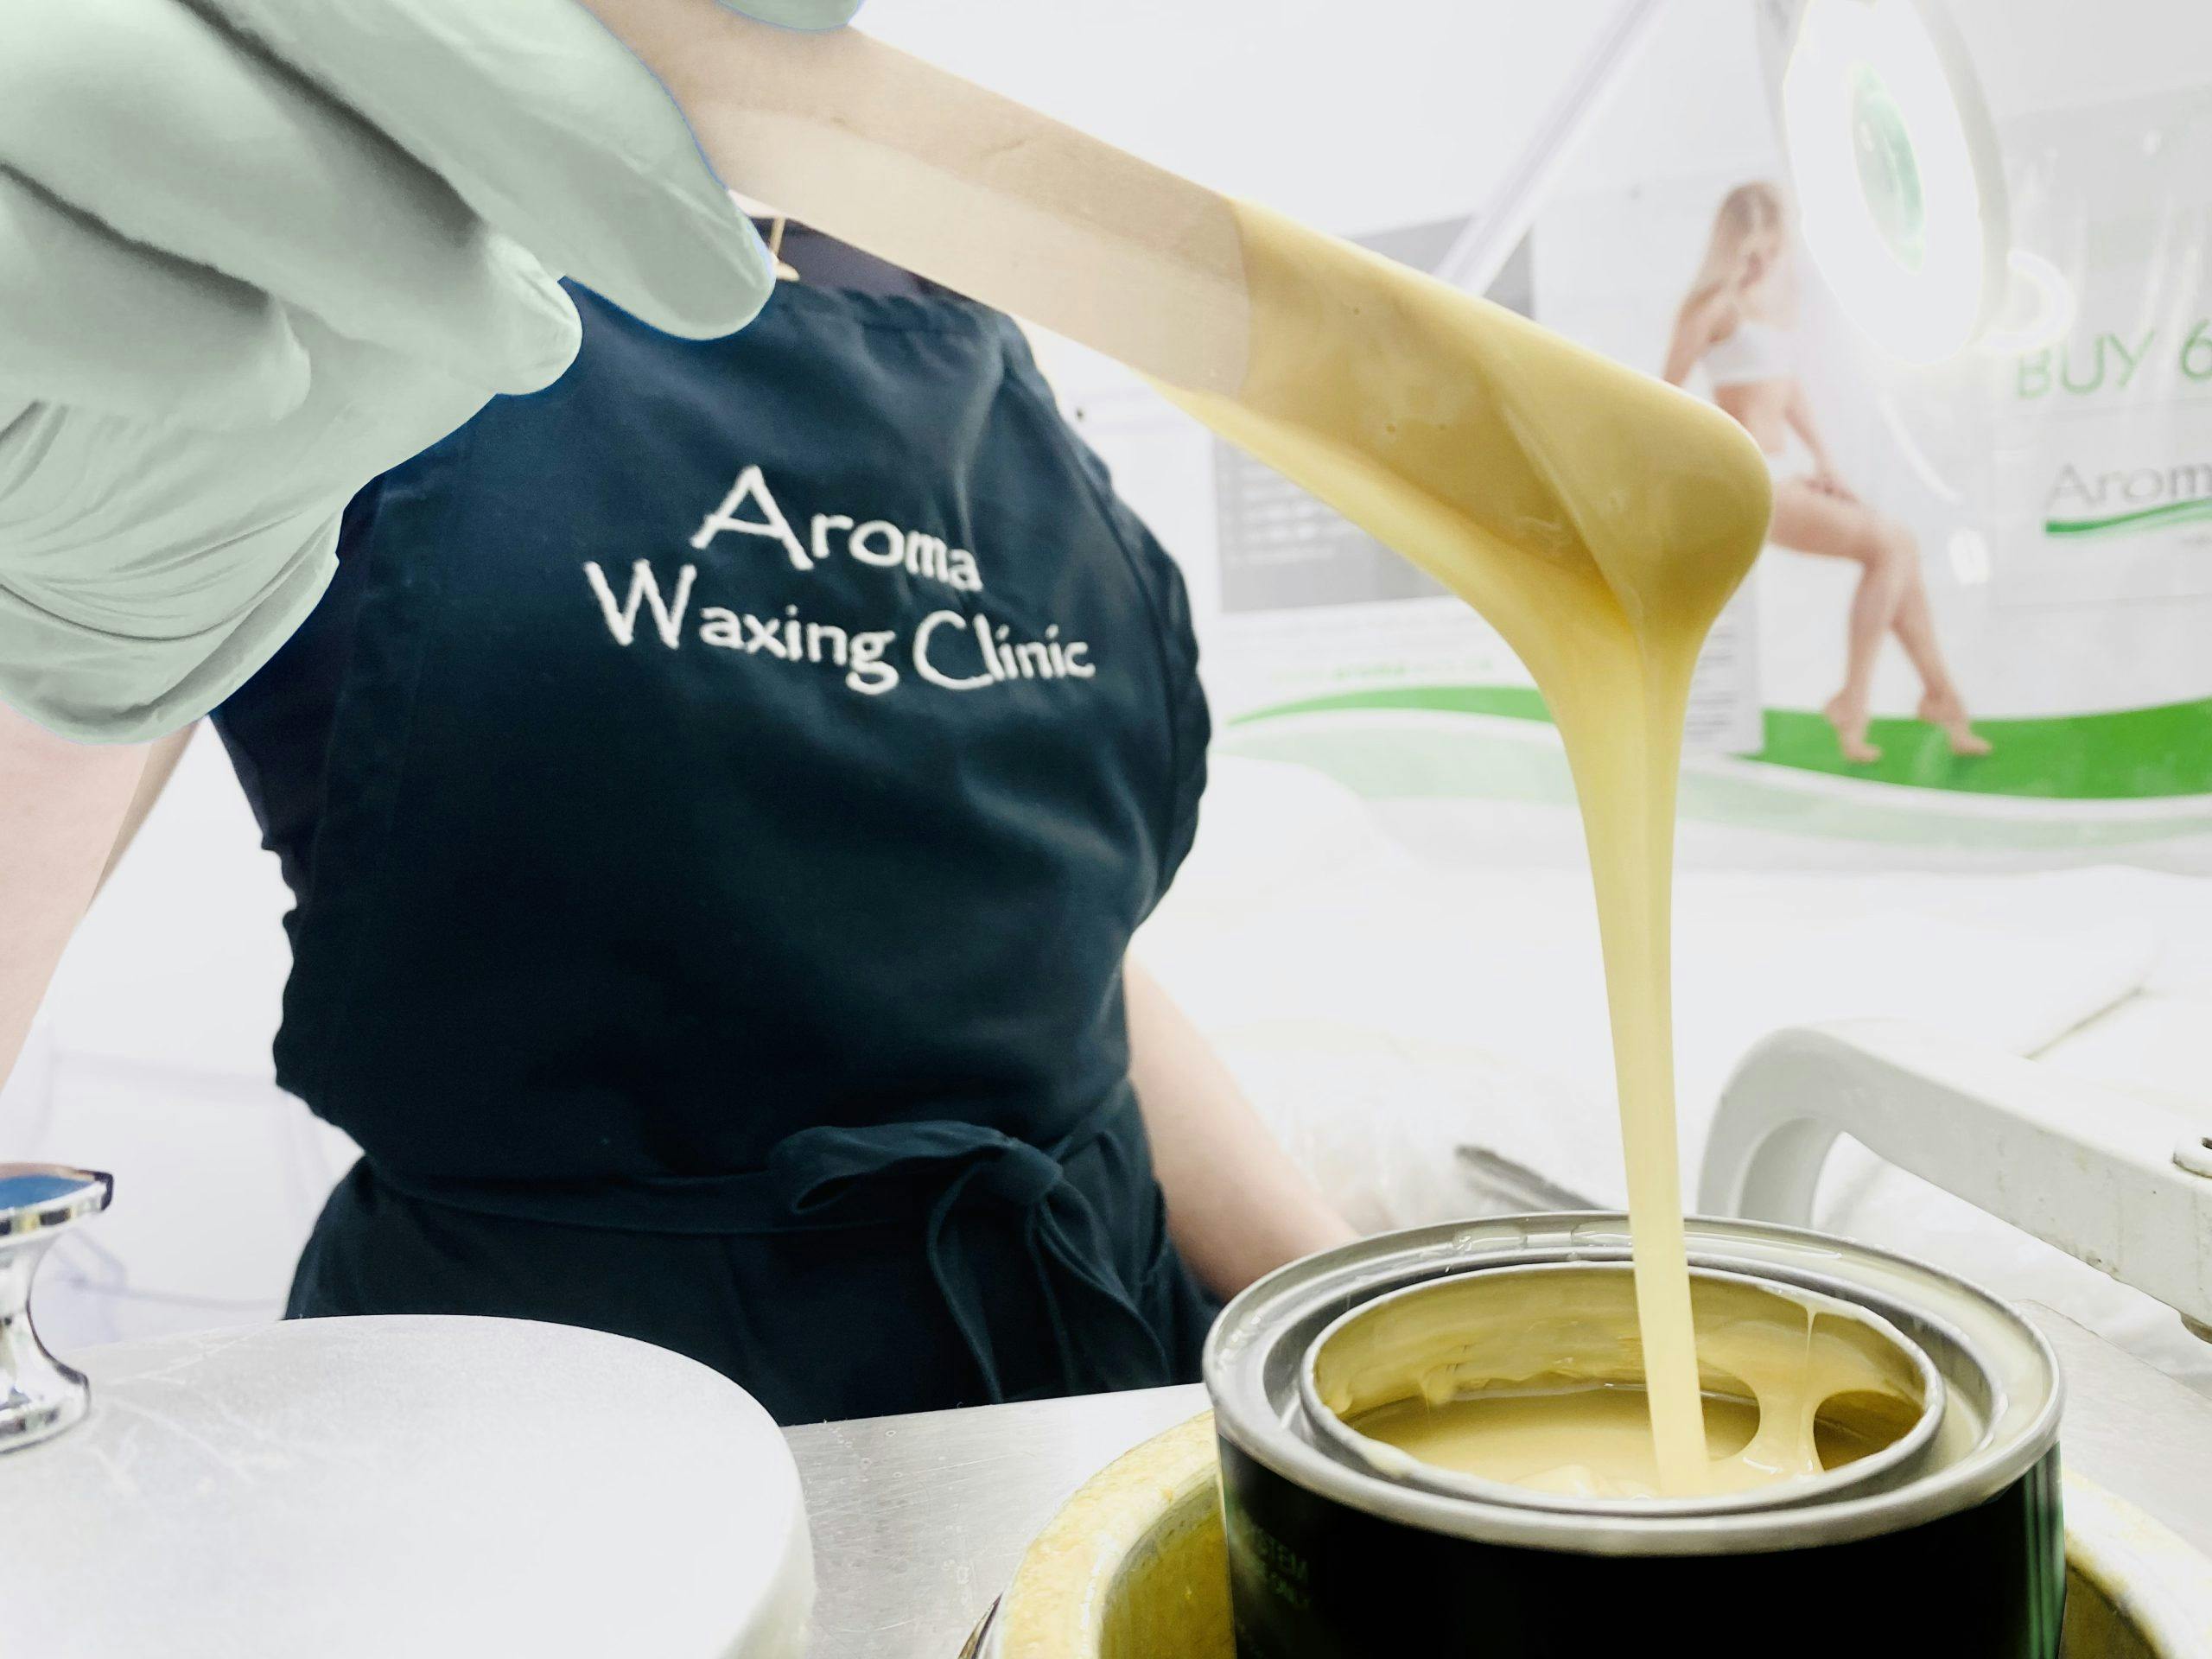 Person with Aroma Waxing Clinic apron pulling cream based wax with stick from wax pot